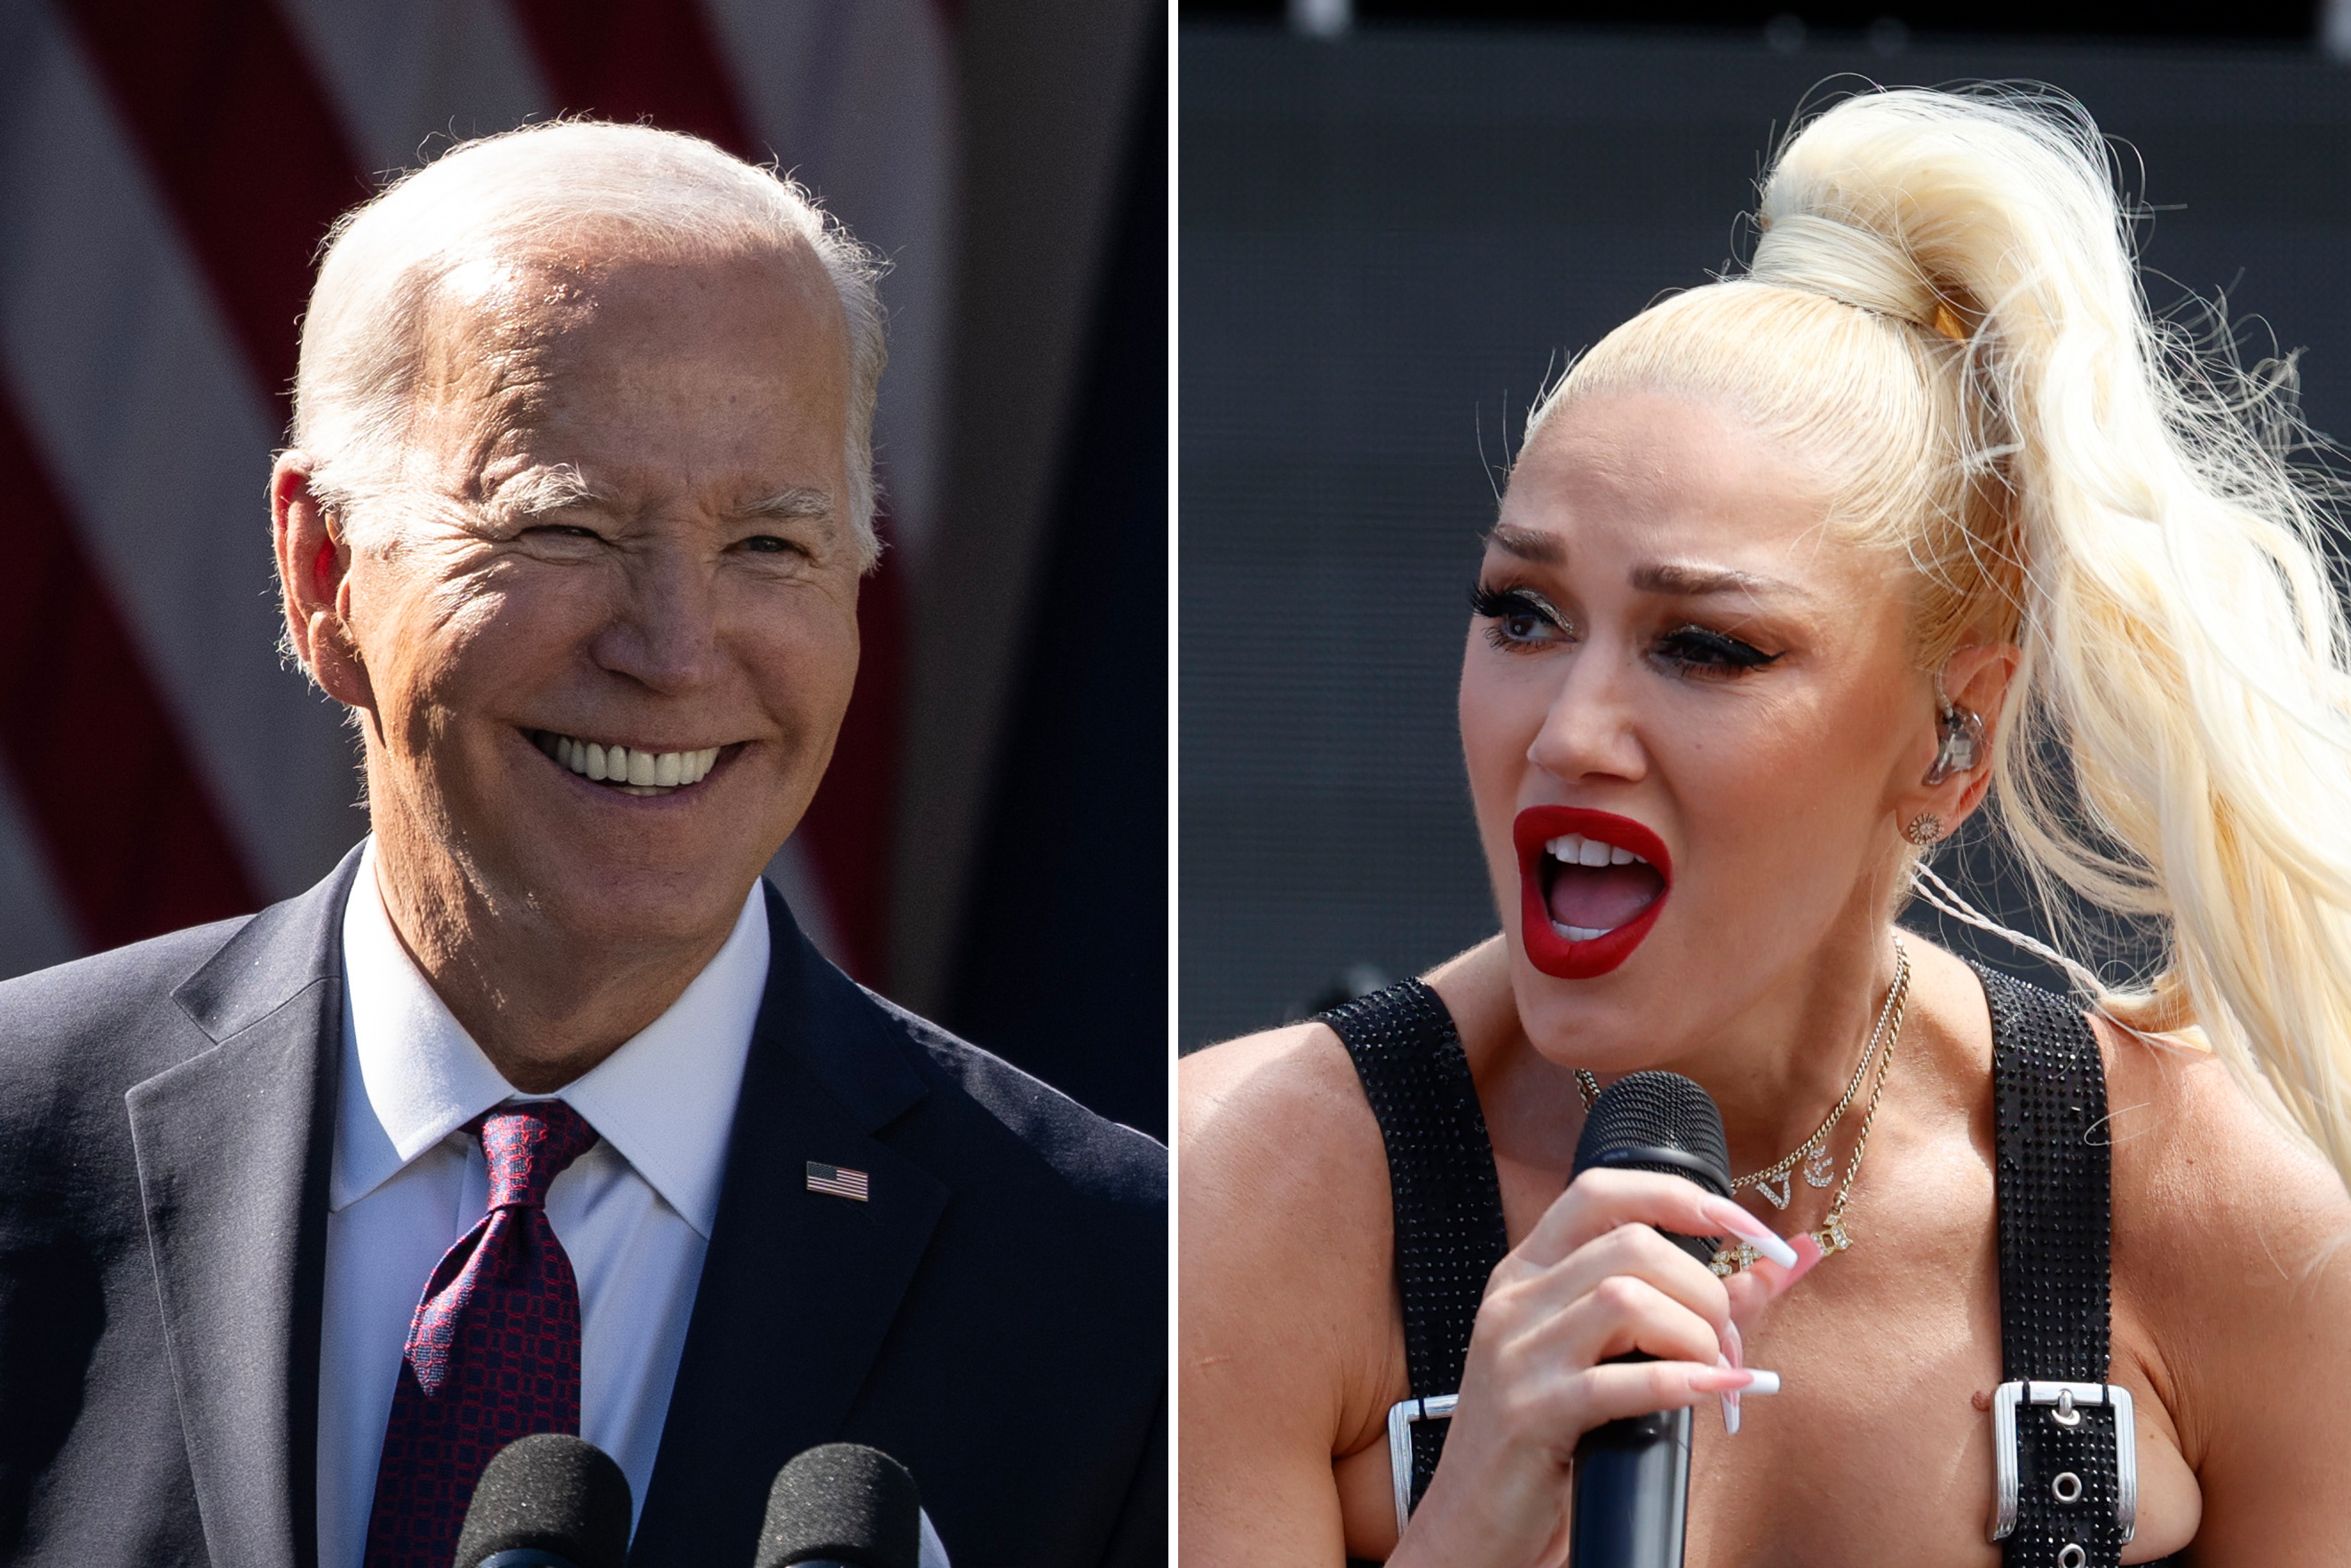 A tight photos of a smiling President Joe Biden next to a photos of performer Gwen Stefani singing with a microphone in her hand